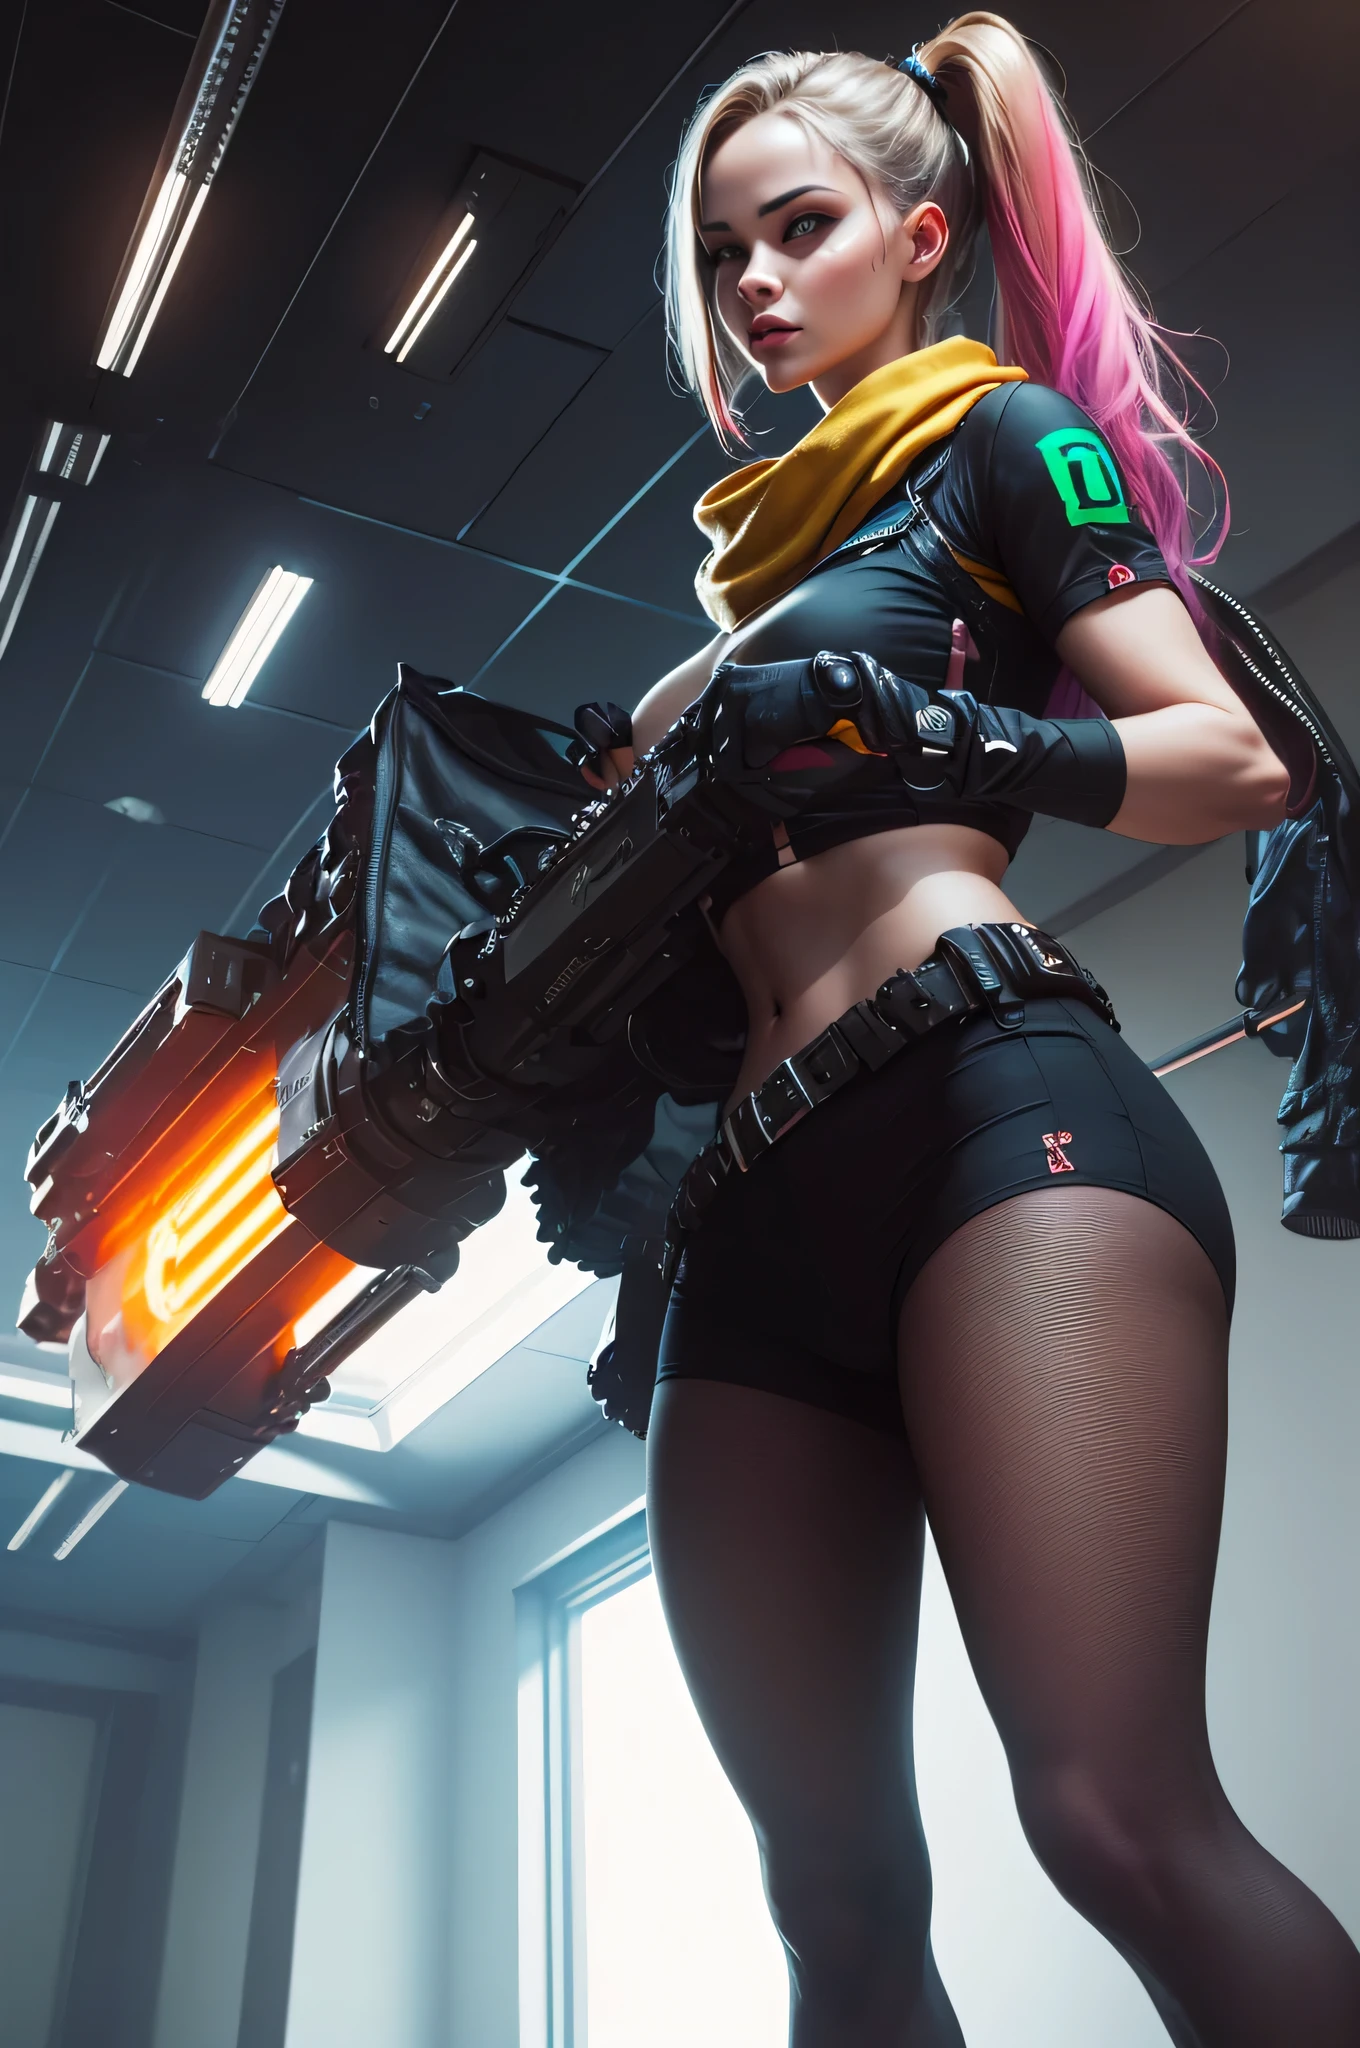 unreal engine:1.4,CG K ultra realistic, photorealistic:1.4, skin texture:1.4, artwork 1girl, Gatling gun, Shell, looking at viewer, dynamic pose, Blows, ammunition belt, gloves, breasts, shooting, extremely detailed :1.4, more detailed, optical mix, playful patterns, animated texture, unique visual effect, or cyberpunk yellow color, red pantyhose, yellow leather miniskirt, masterpiece, ((colors, cyan, greens, pink, brown: 1.2)) , 8k realistic digital art)), 32k